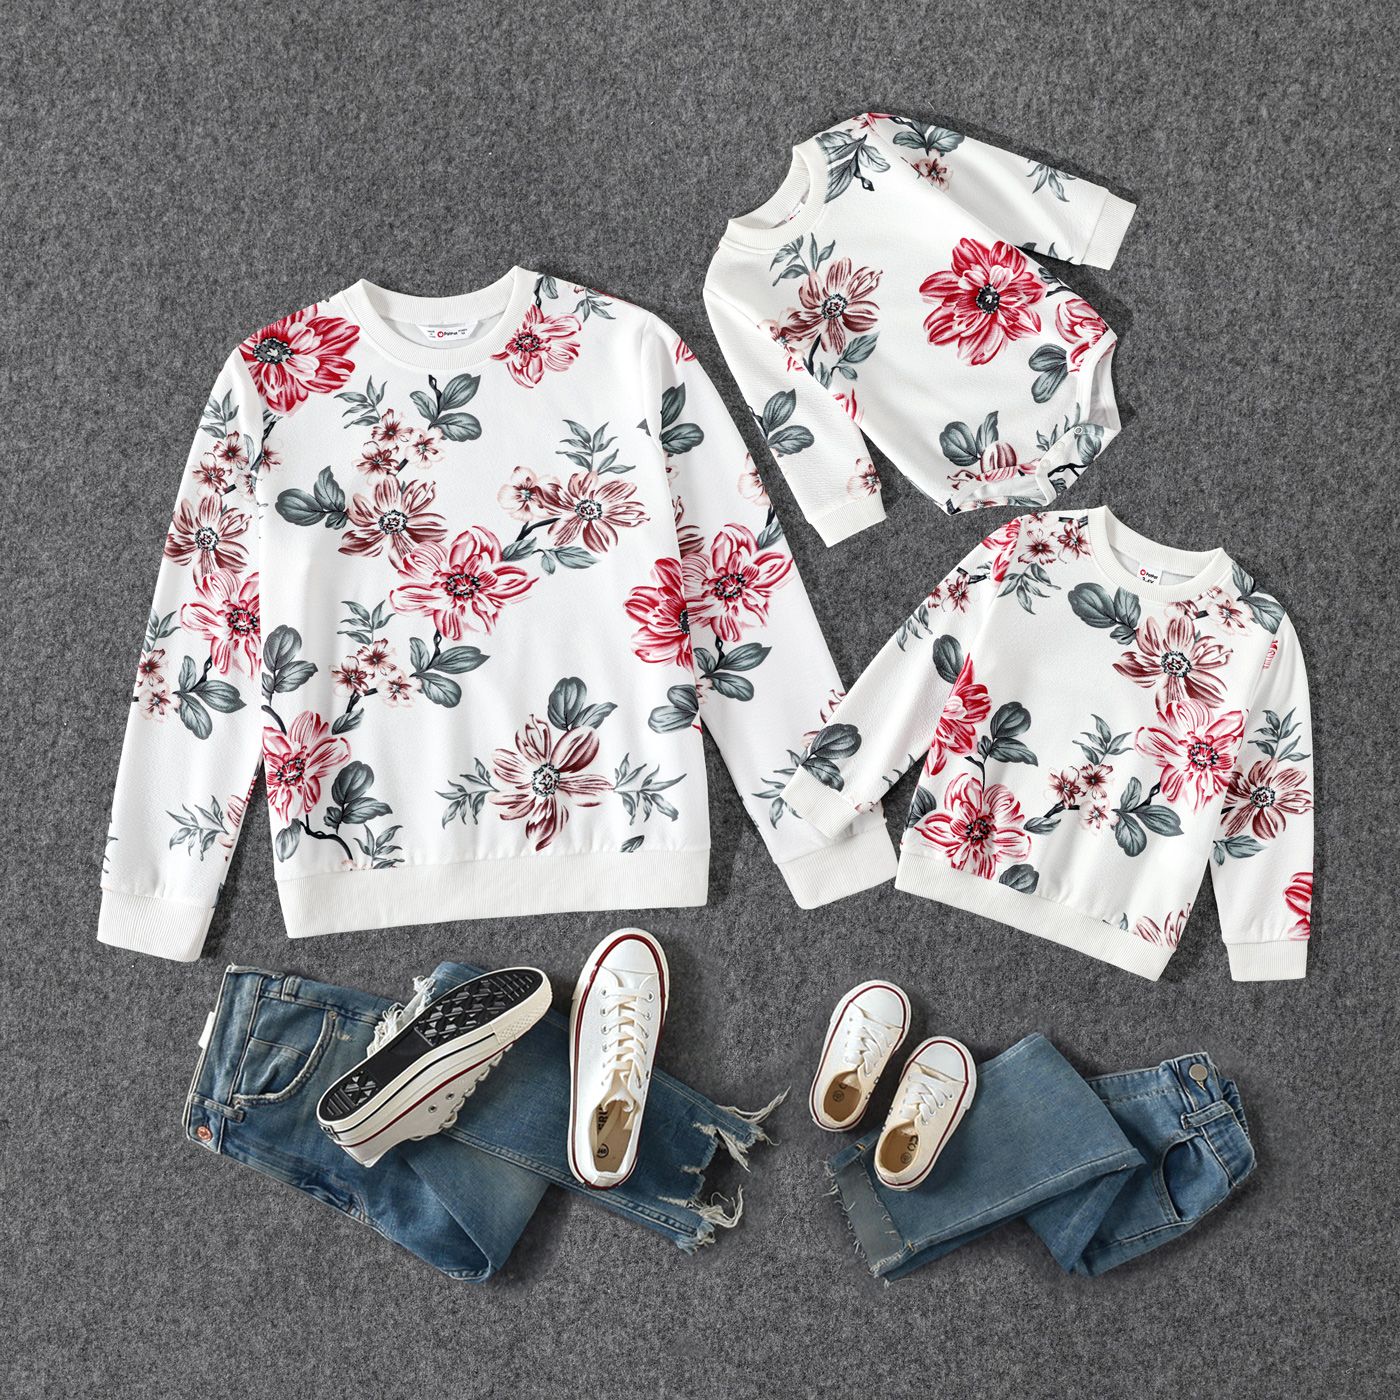 

Floral Print Crewneck Drop Shoulder Lace Long-sleeve Tops for Mom and Me